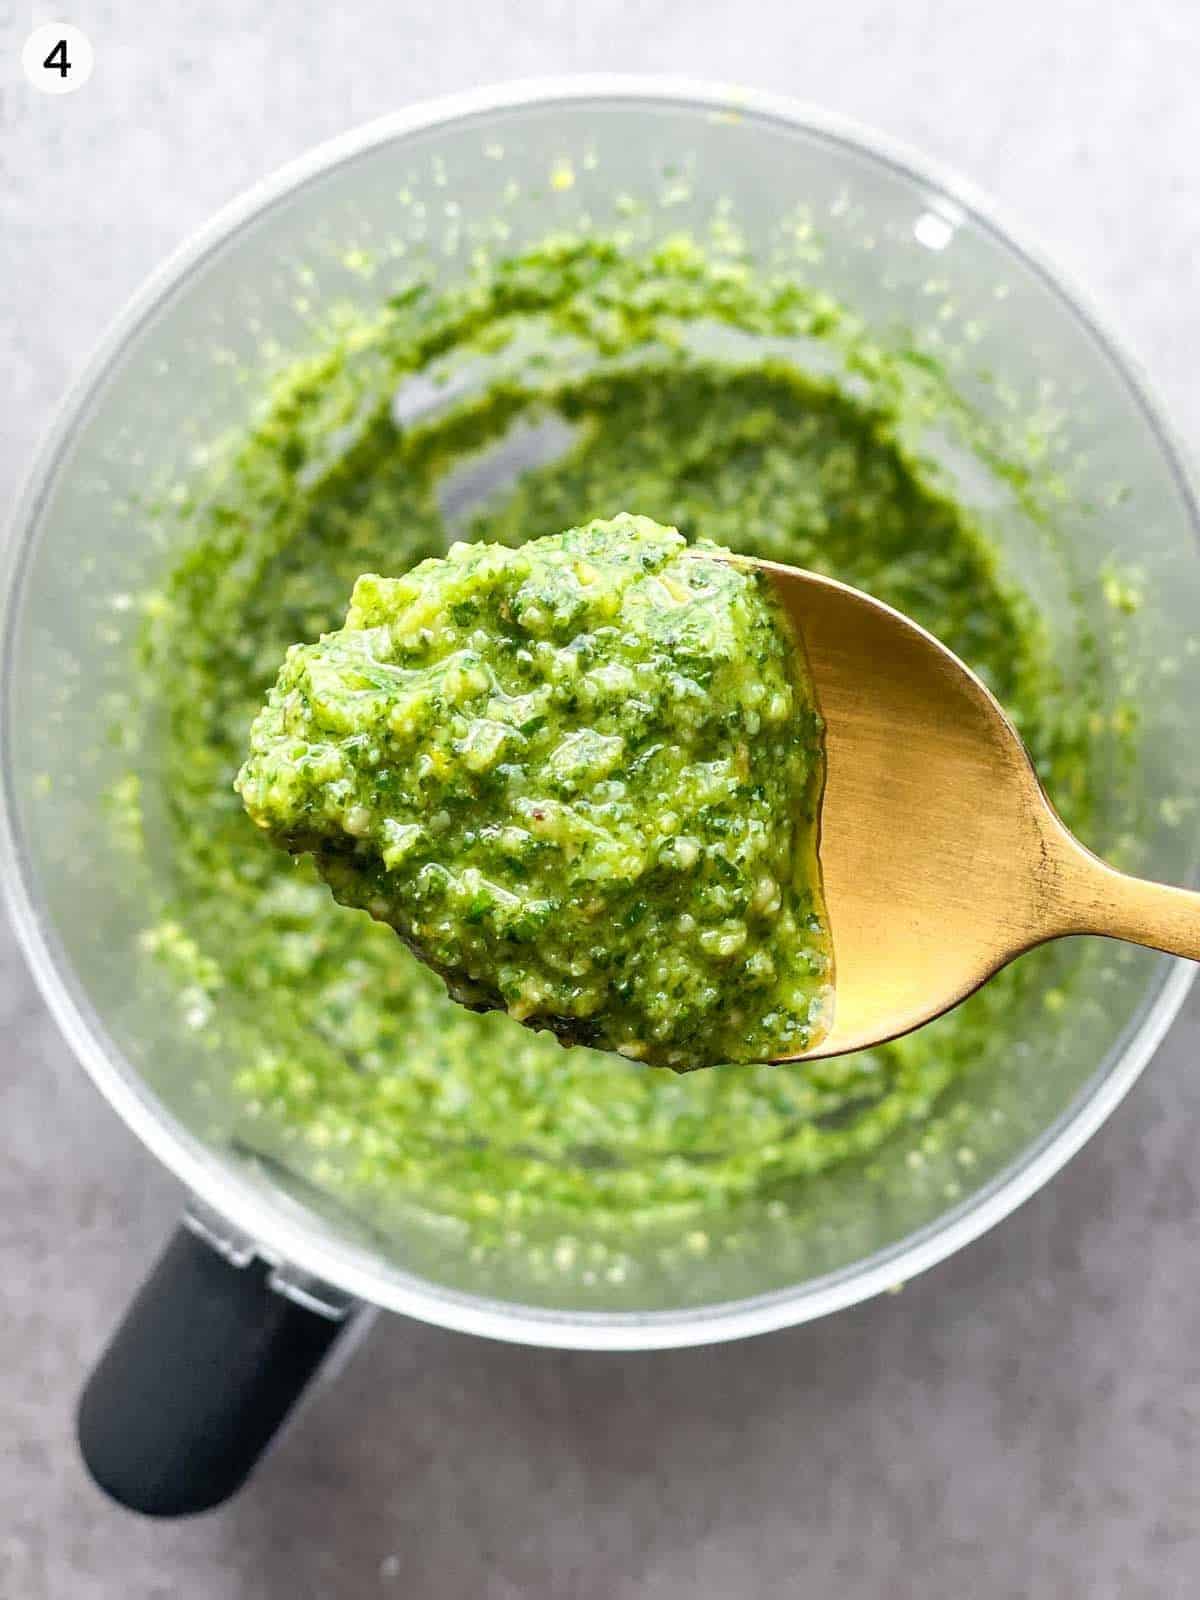 A gold spoon lifting basil mint pesto from a food processor